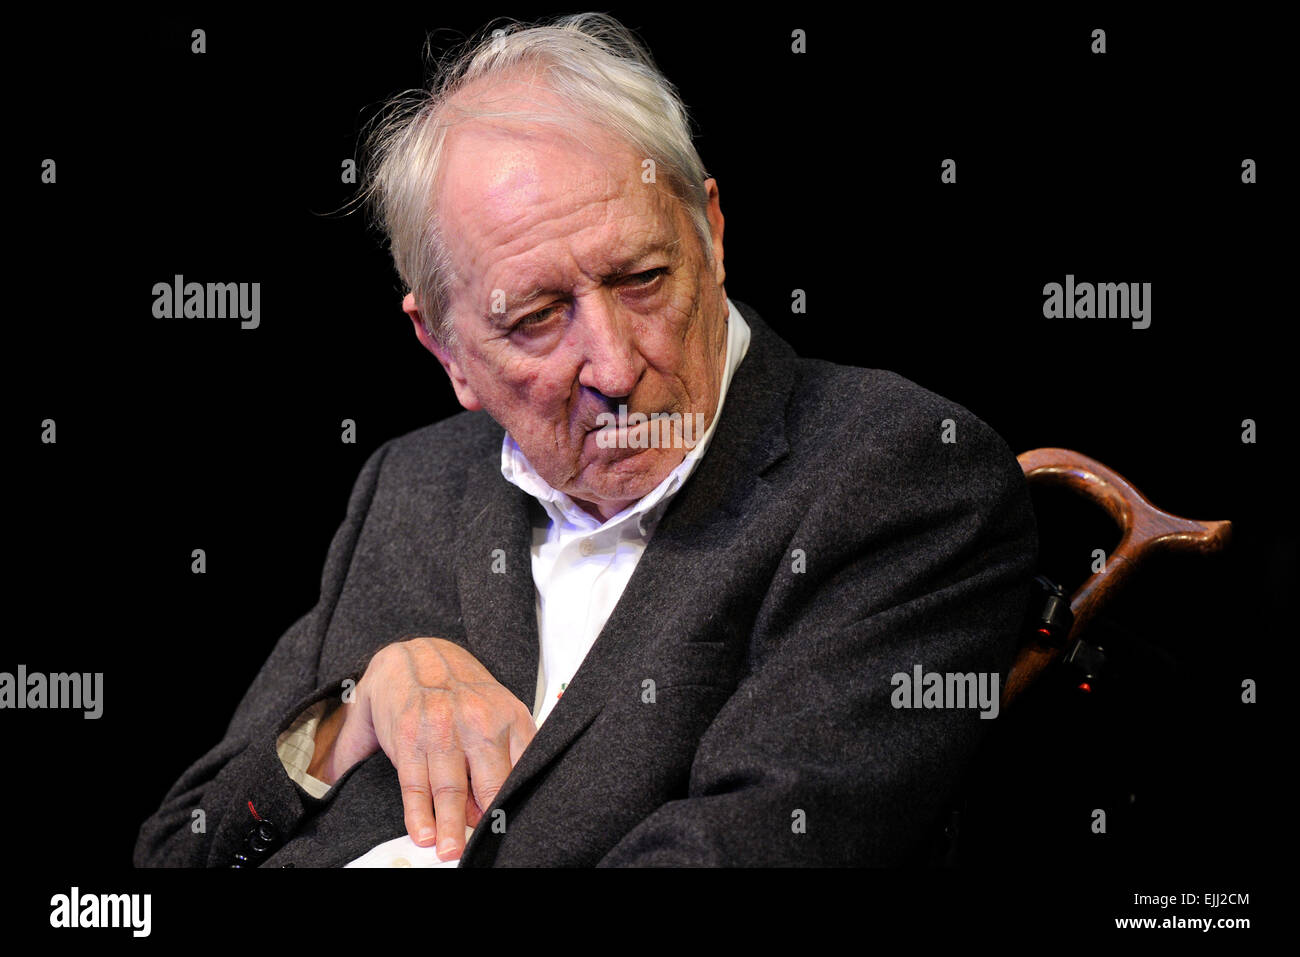 Cologne, Germany. 21st Mar, 2012. Swedish author and Nobel Prize Laureate Tomas Transtroemer is pictured during a reading at the Lit.Cologne in Cologne, Germany, 21 March 2012. The biggest European literature festival Lit.Cologne will go on till 24 March 2012. Photo: Marius Becker/dpa/Alamy Live News Stock Photo